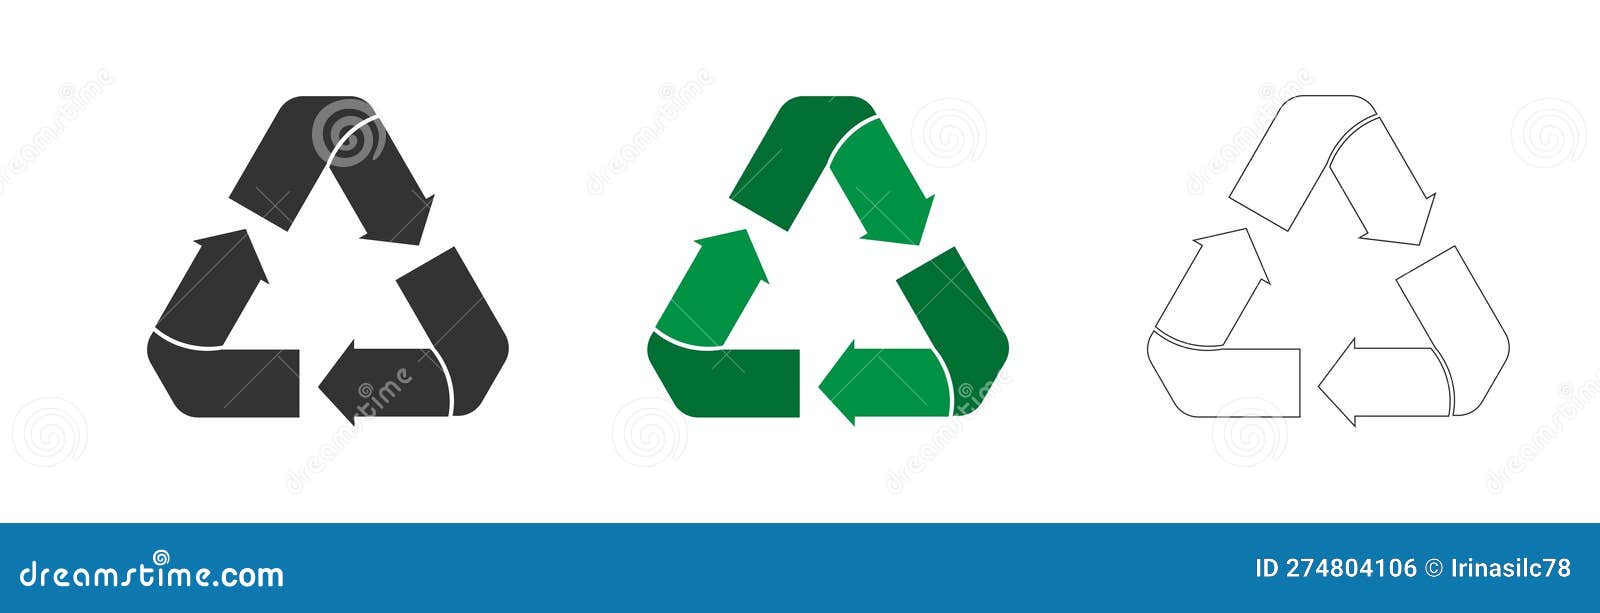 set of recycling icons. triangle recycling sign 